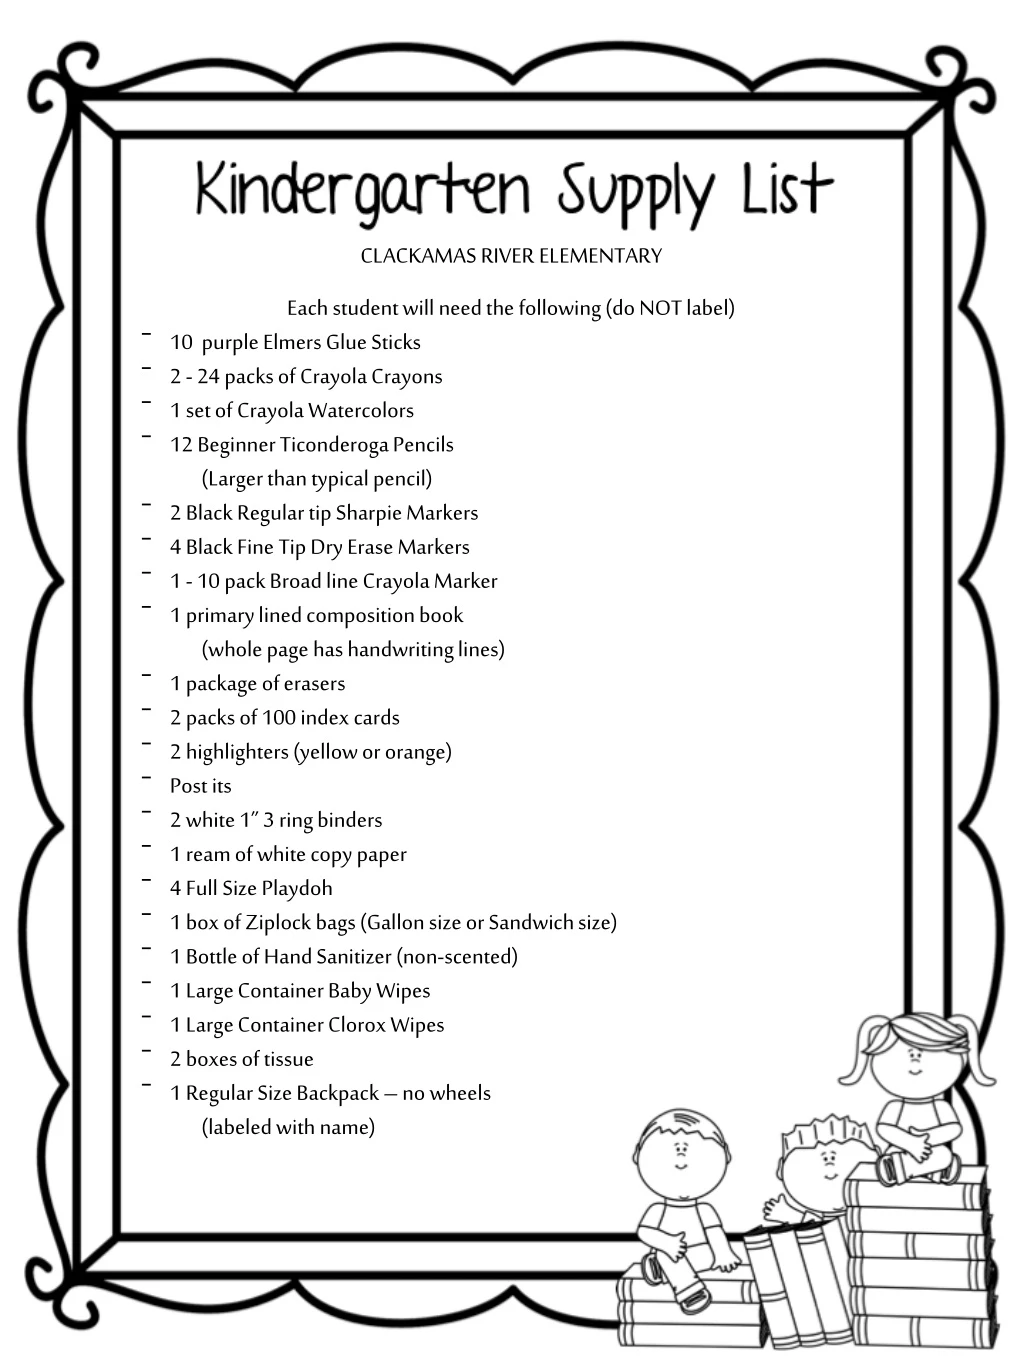 clackamas river elementary each student will need